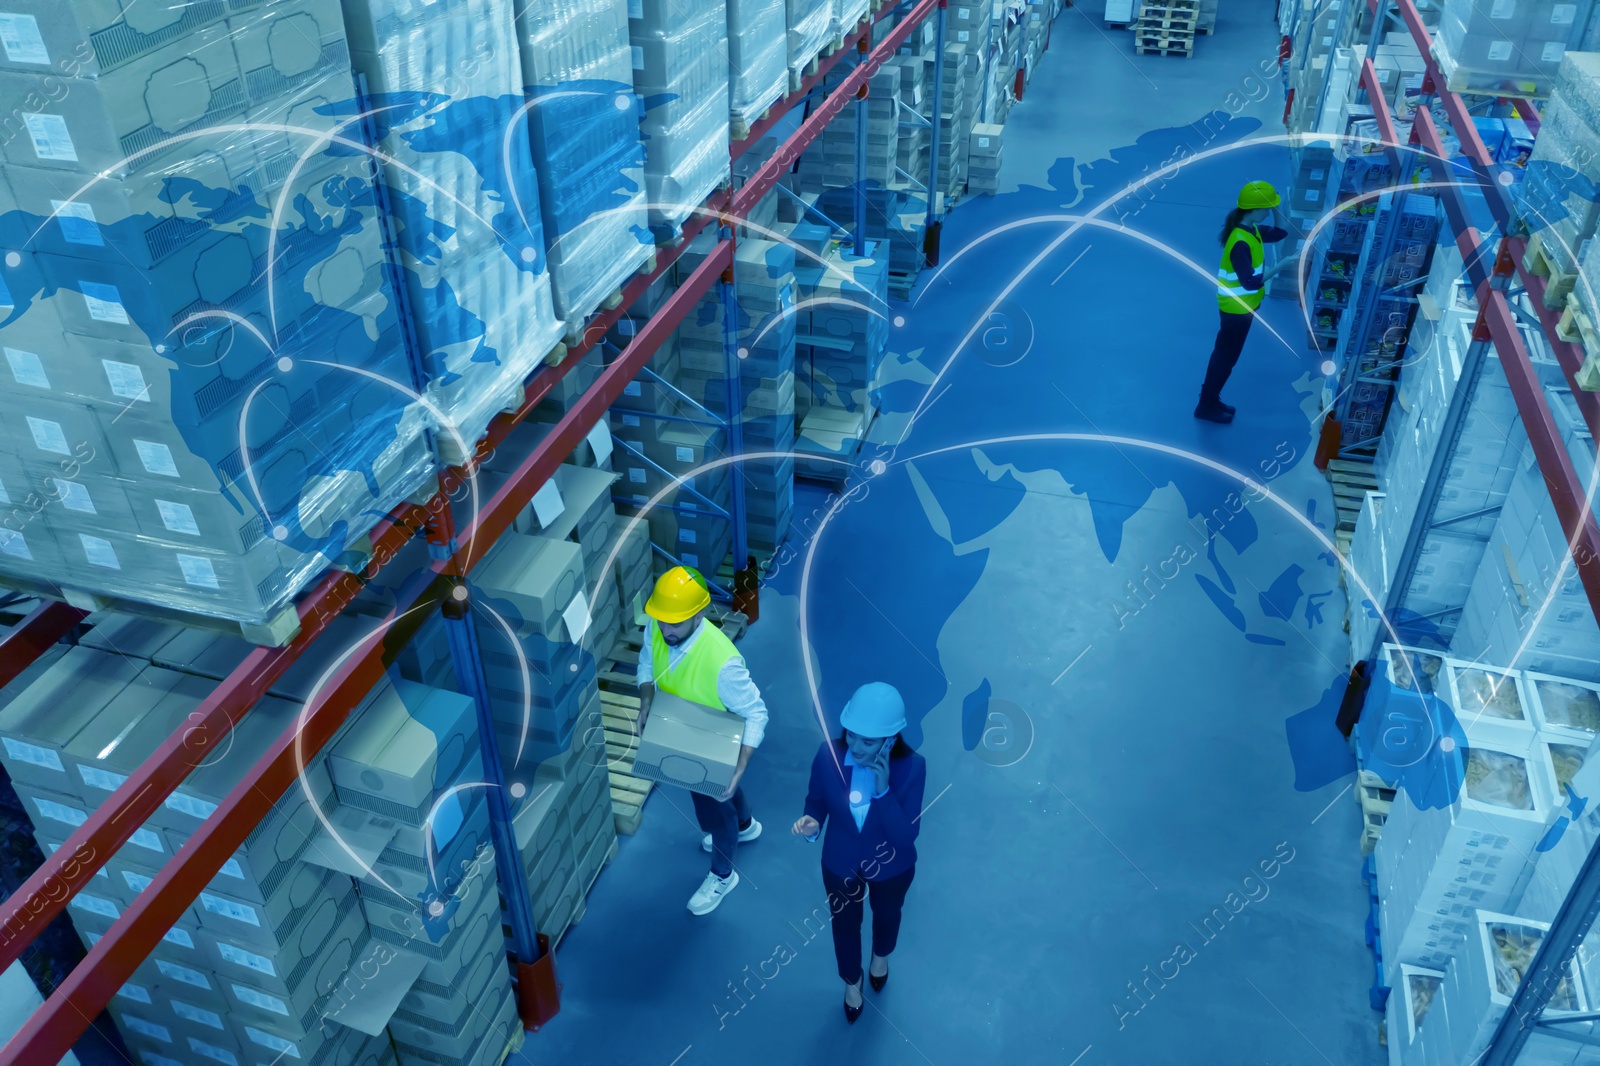 Image of Worldwide logistics. Manager and workers at warehouse and illustration of map, above view